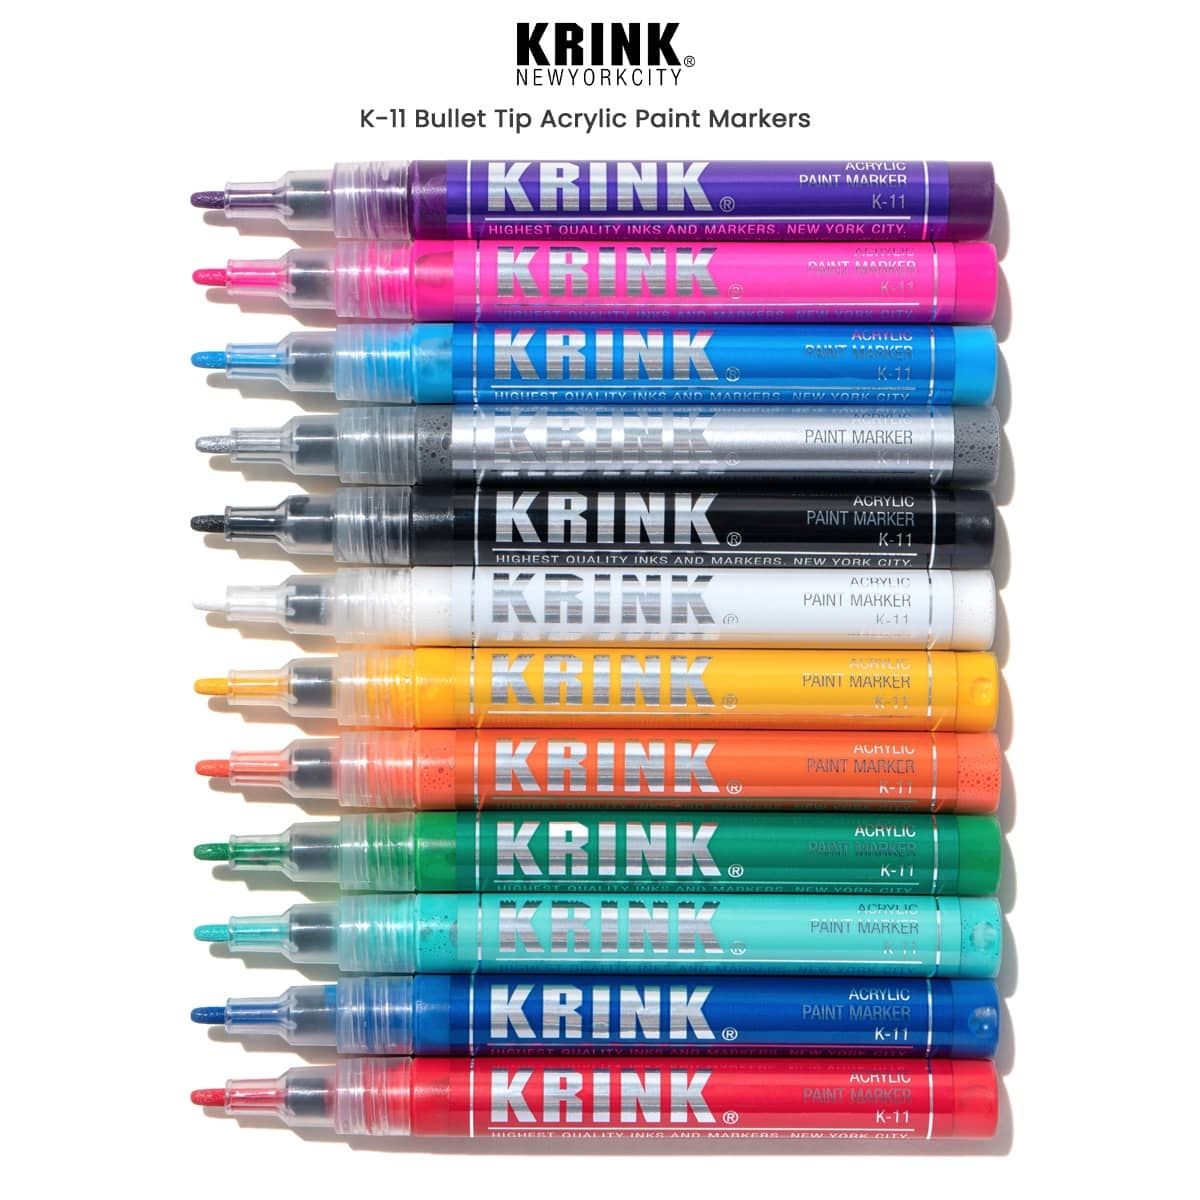 Krink K-11 Bullet Tip Acrylic Paint Markers